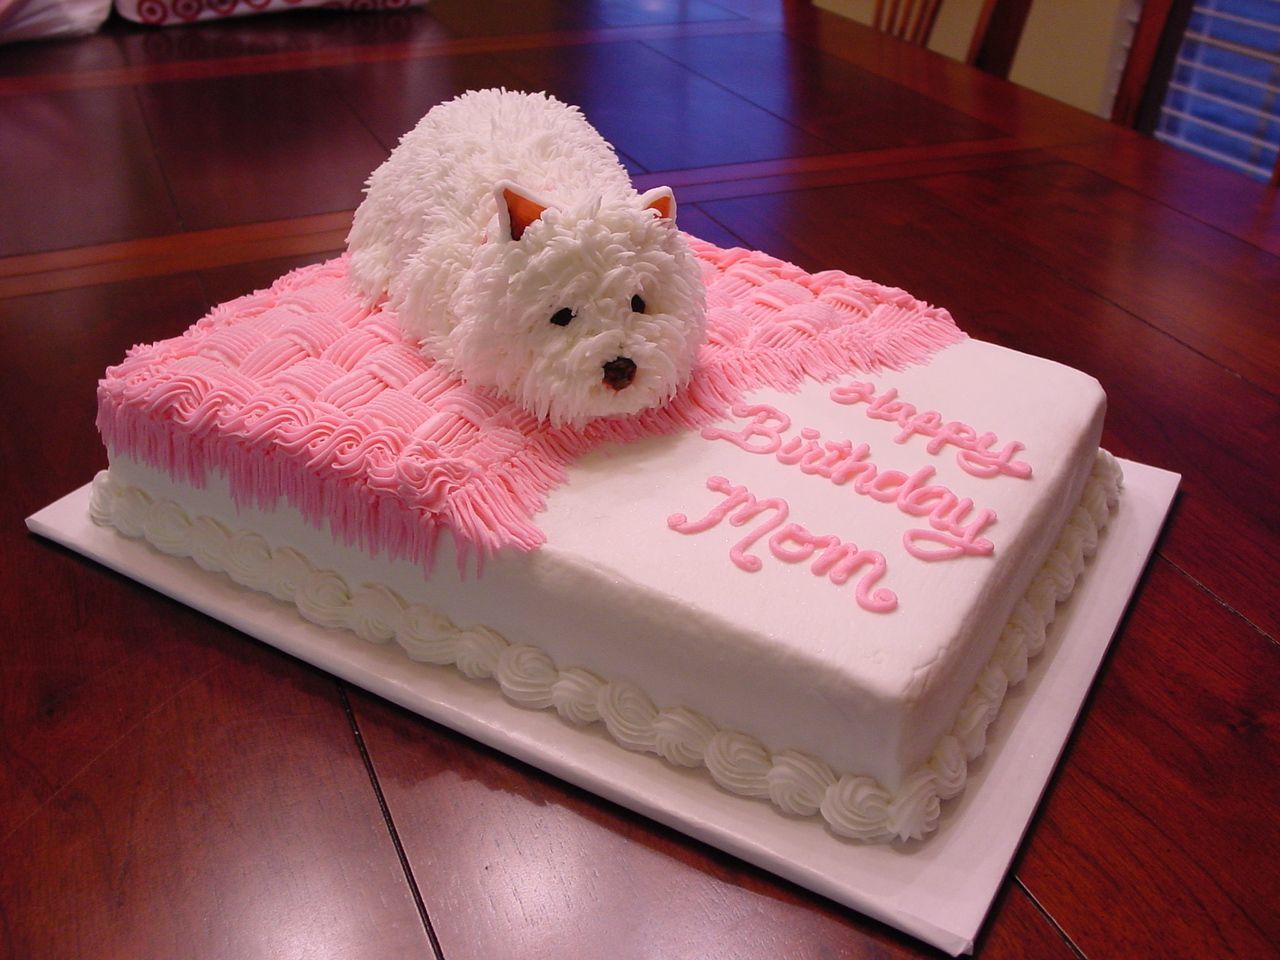 Image source: CakeCentral.com 